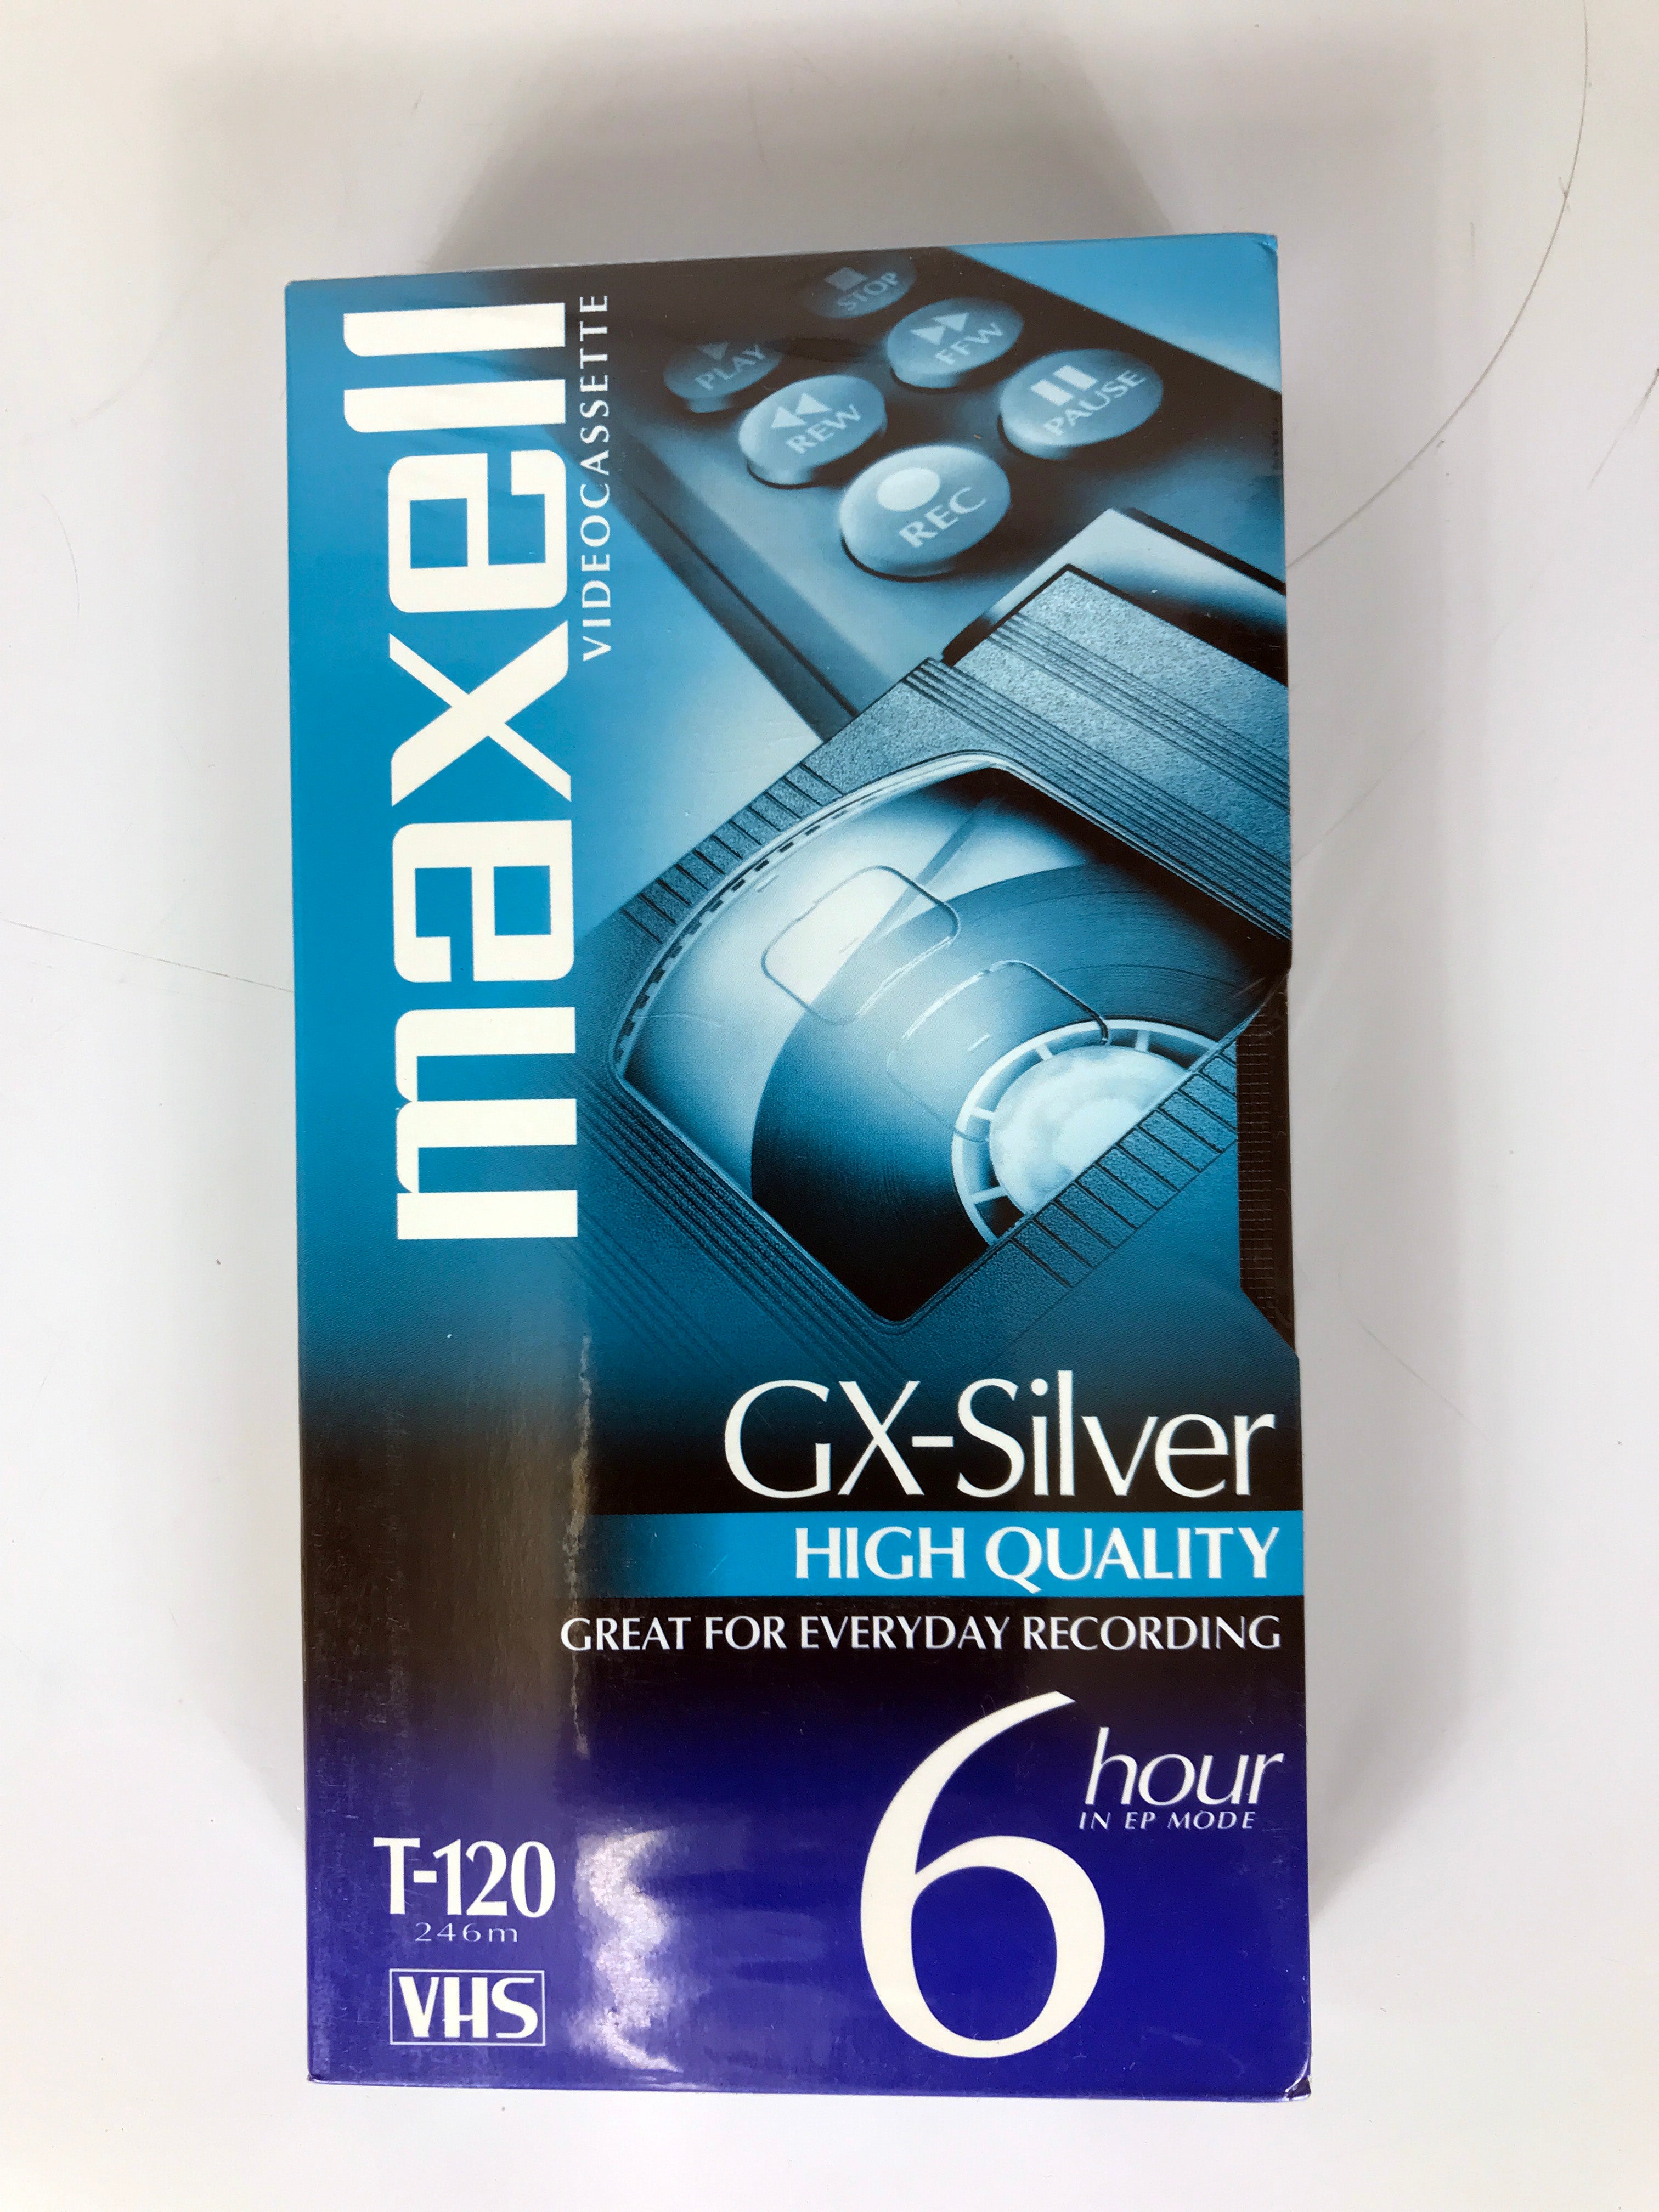 Maxell GX-Silver Video Cassette T-120 *New*